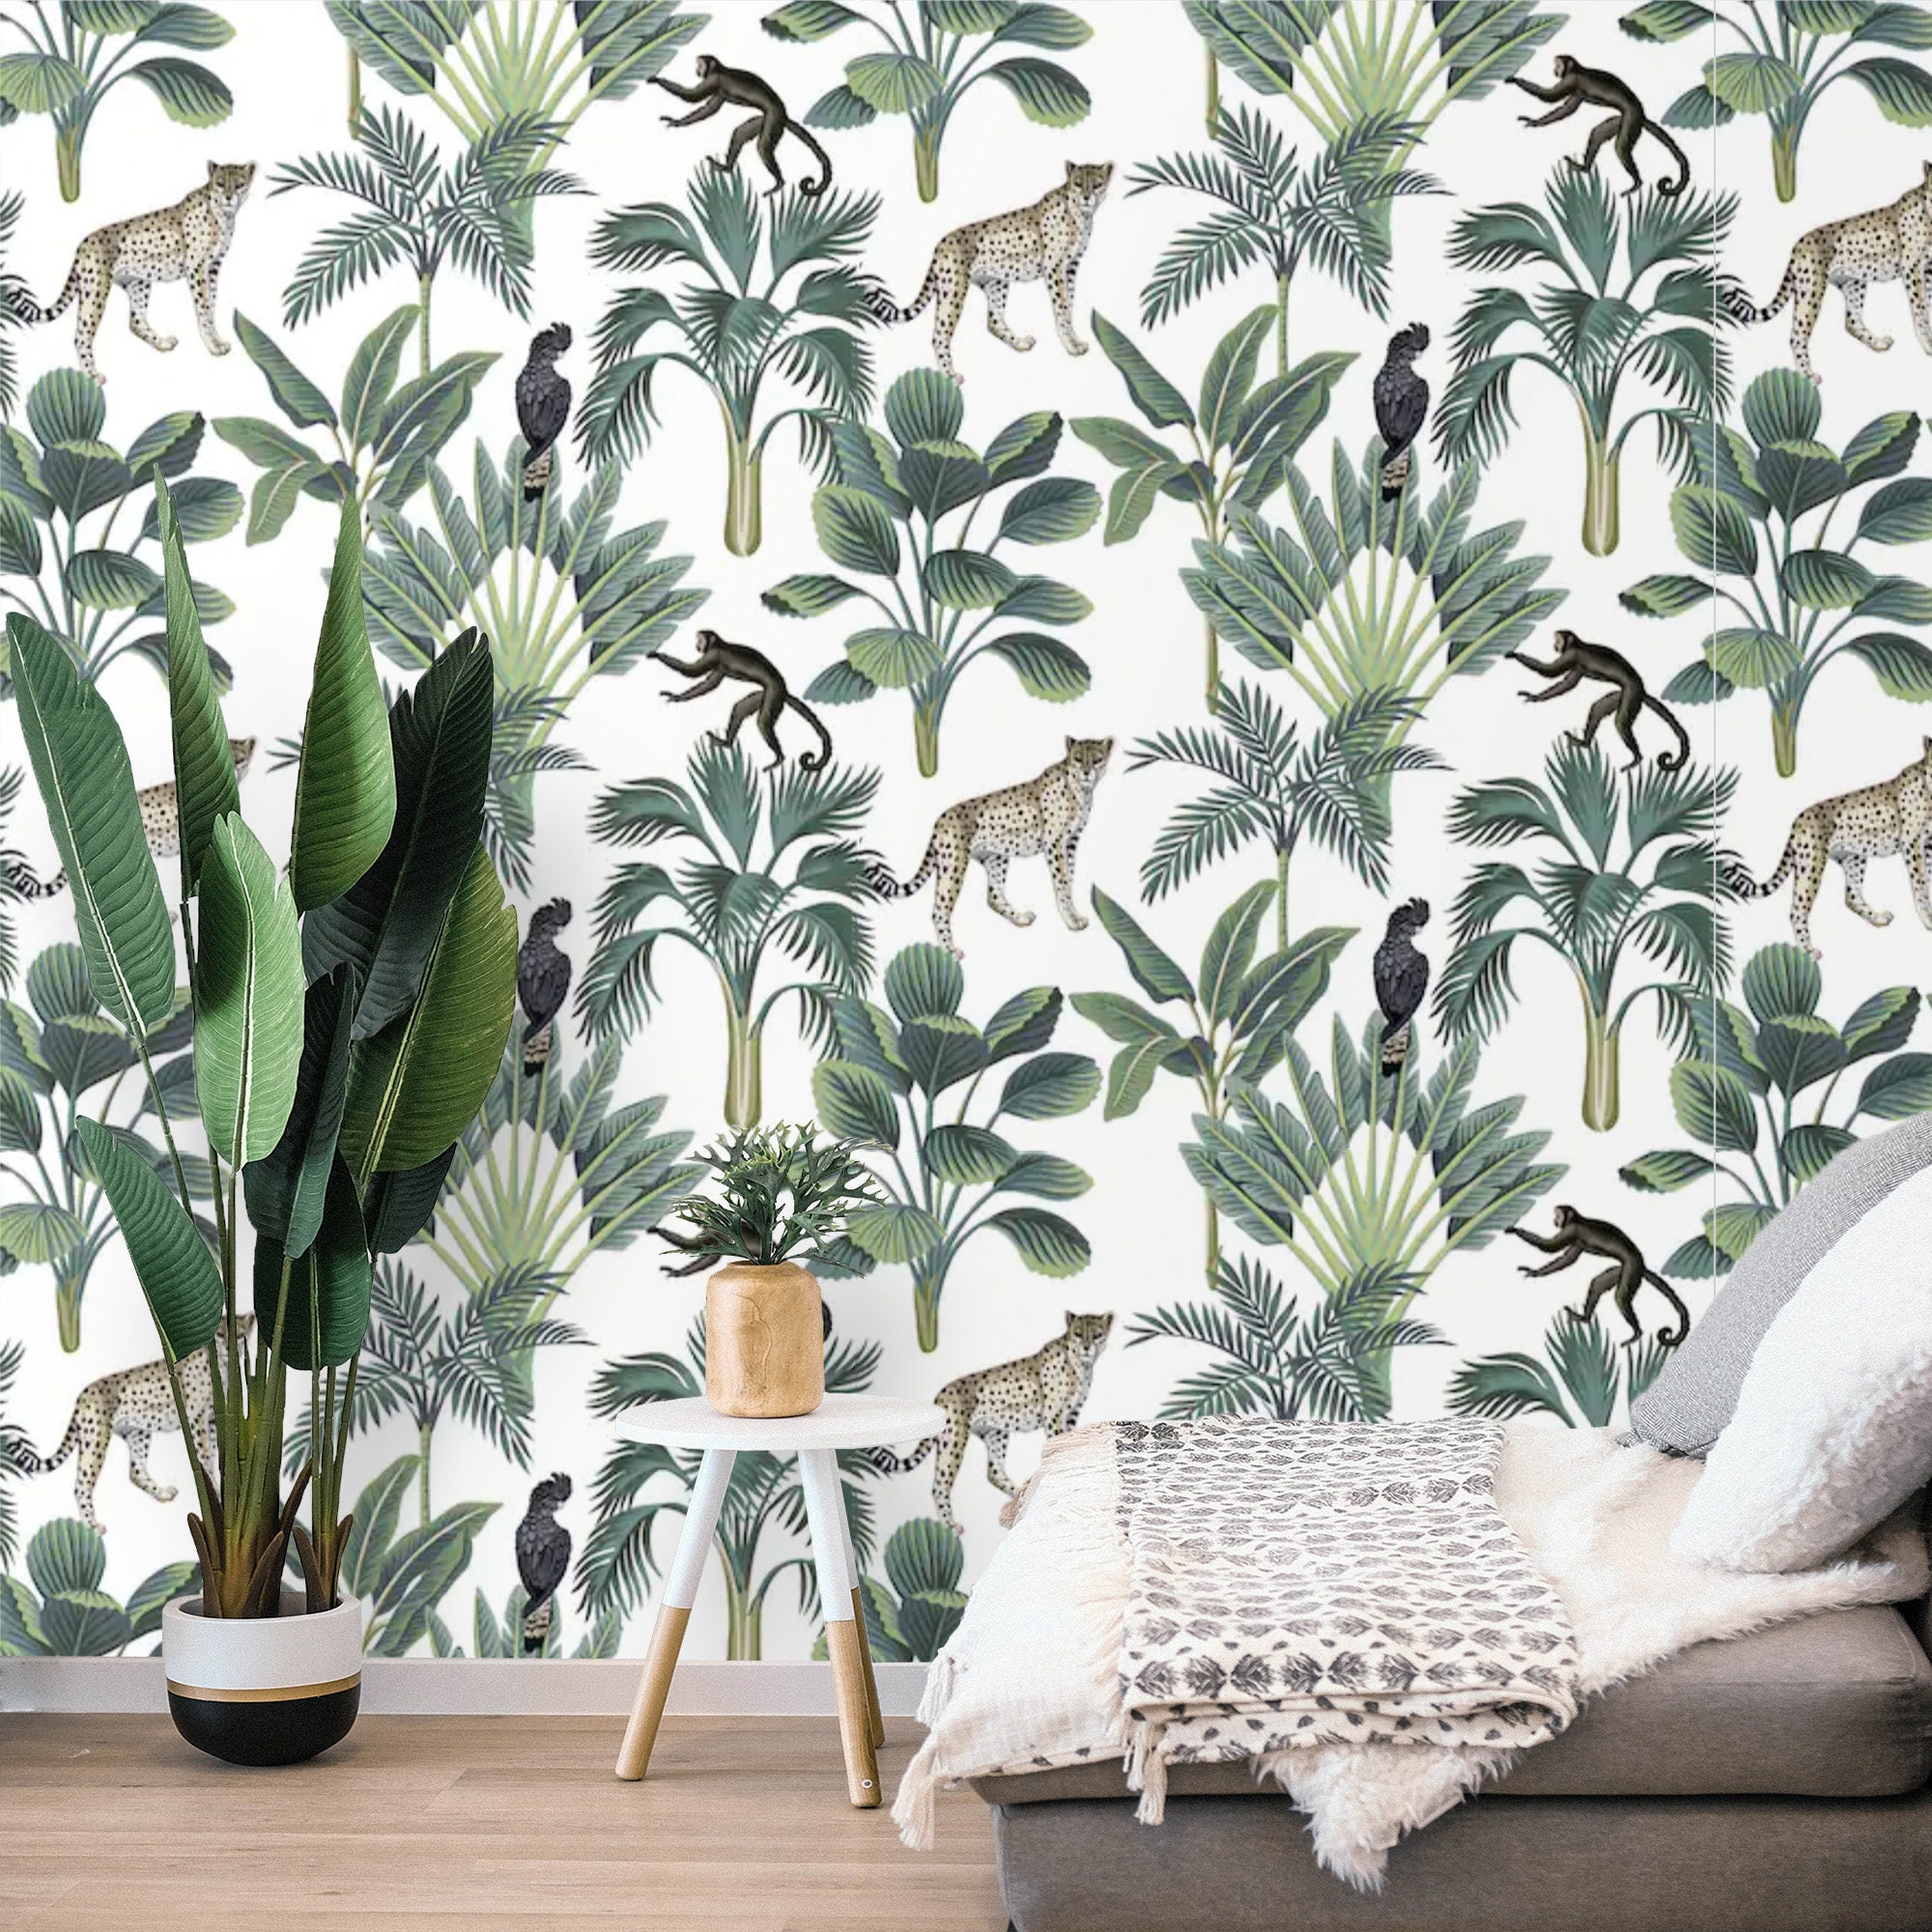 Peel and Stick Palm Leaves Wallpaper Jungle Animals Removable | Etsy